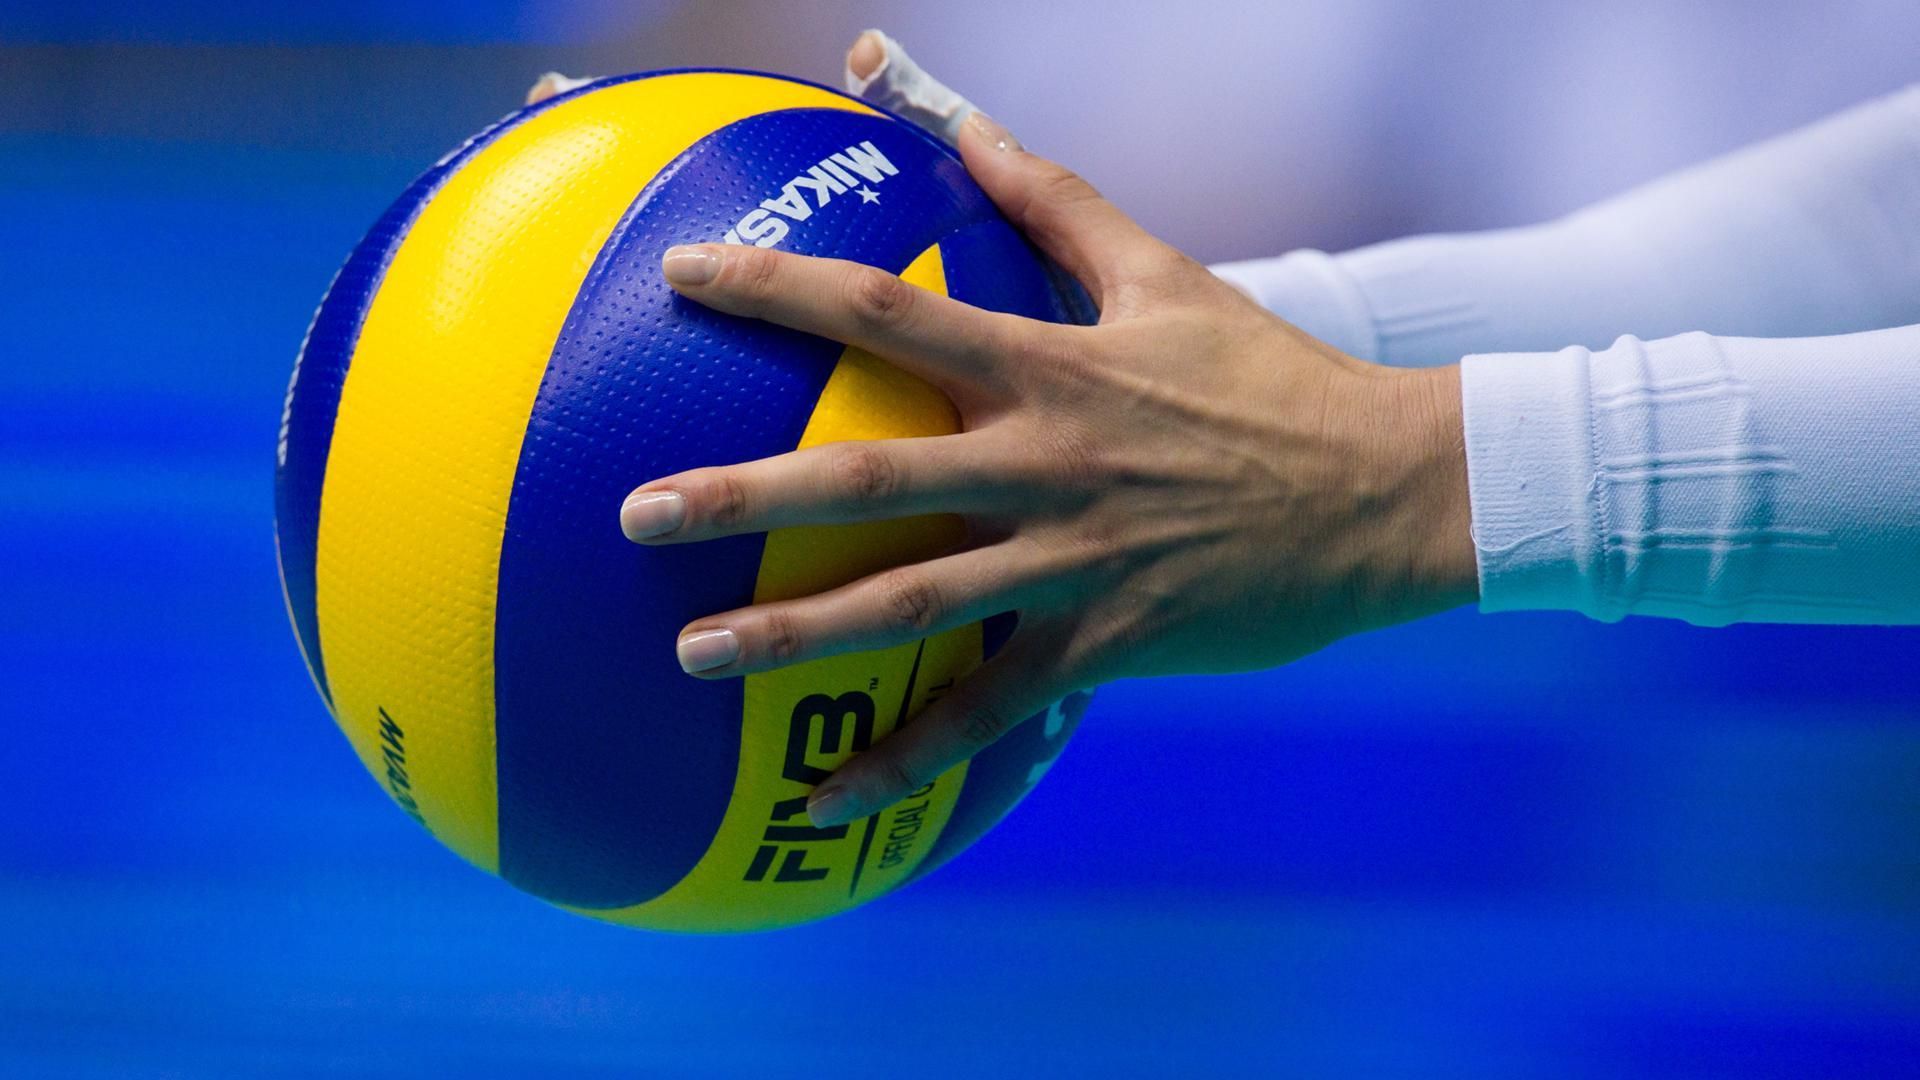 A person holding onto the ball with their hand - Volleyball